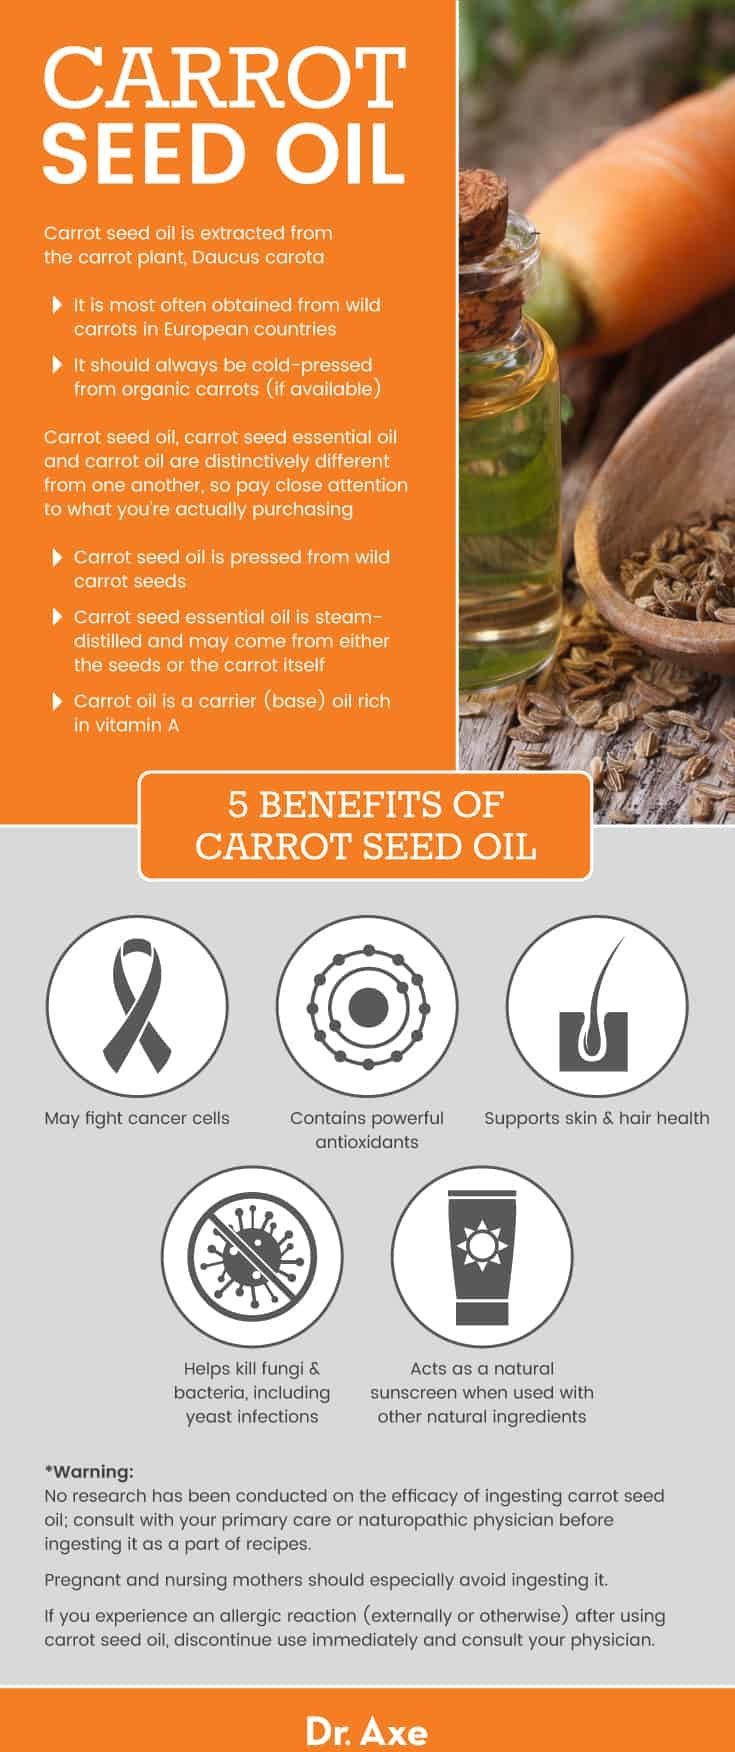 Carrot seed oil benefits - Dr. Axe